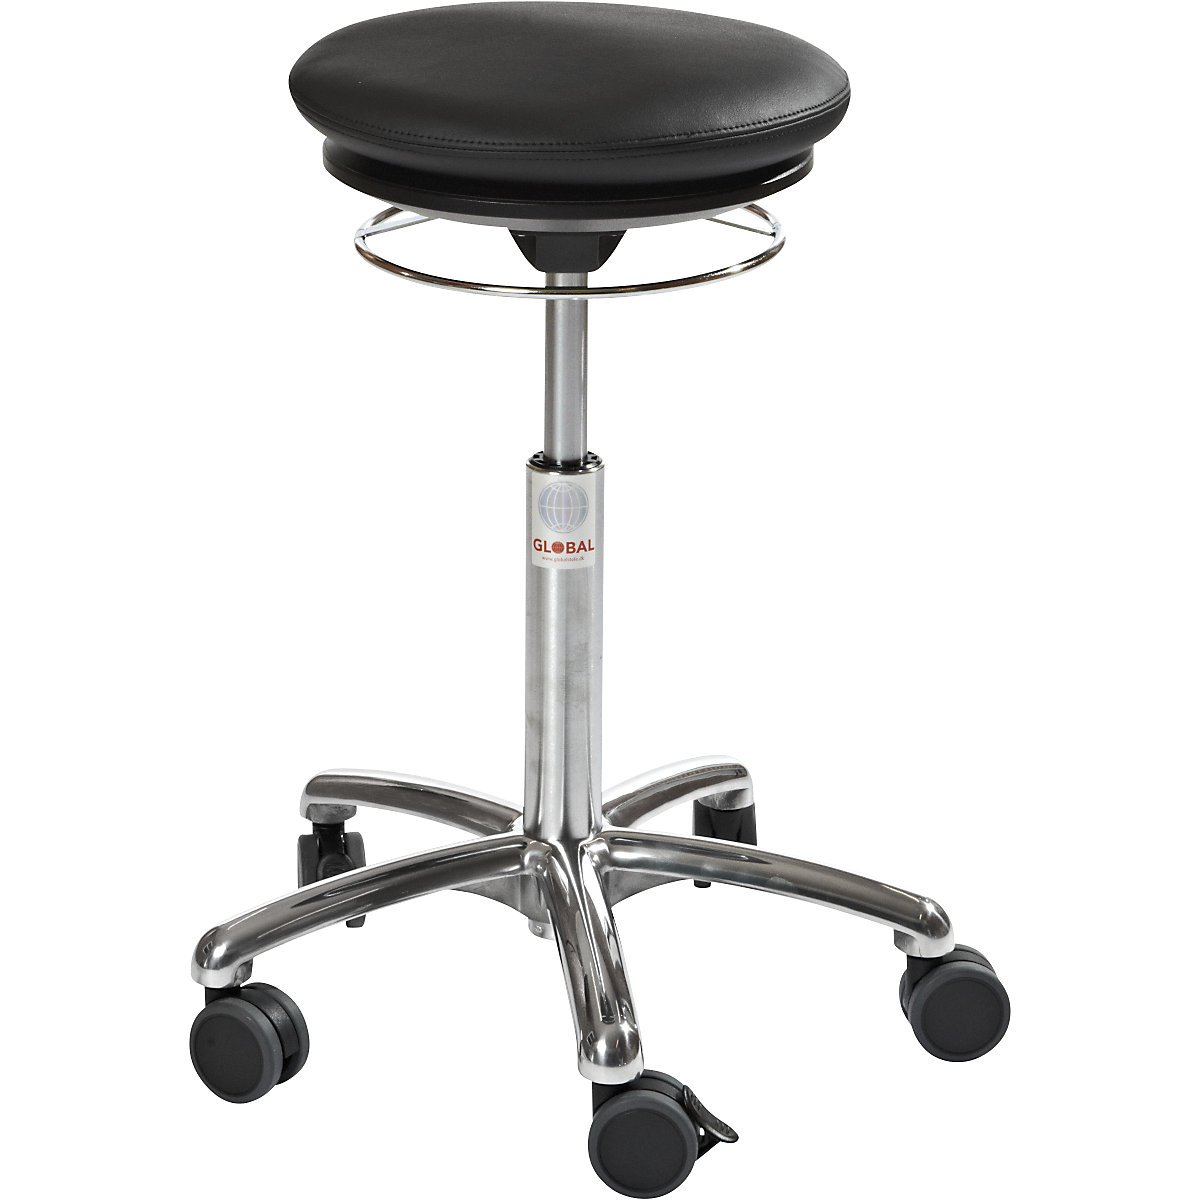 Stool with air cushion seat, vinyl covering, black-4